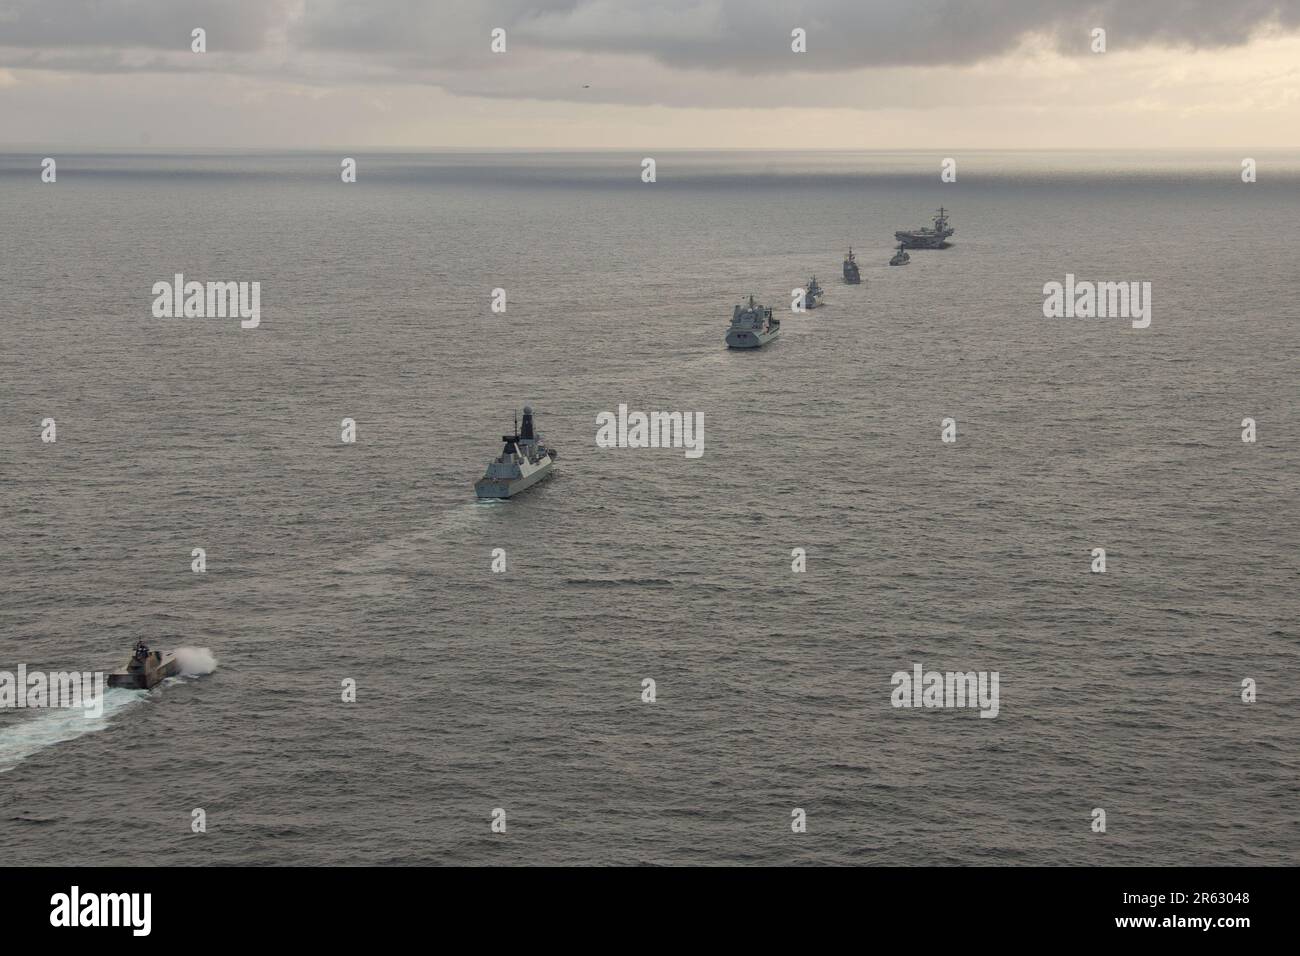 The Gerald R. Ford Carrier Strike Group sails in formation with NATO allied ships during an integrated sailing event, June 5, 2023. The ships sailing include the worldÕs largest aircraft carrier USS Gerald R. Ford (CVN 78), British Royal Navy Type 23 Frigate HMS Northumberland (F238), Ticonderoga-class guided missile cruiser USS Normandy (CG 60), Royal Norwegian Navy Fridjof Nansen-class Frigate HNoMS Otto Sverdrup (F312), British Royal Fleet Auxiliary Tide-class tanker RFA Tidespring (A136), Daring-class air defense destroyer HMS Defender (D36) and Royal Norwegian Navy Skjold-class corvette H Stock Photo